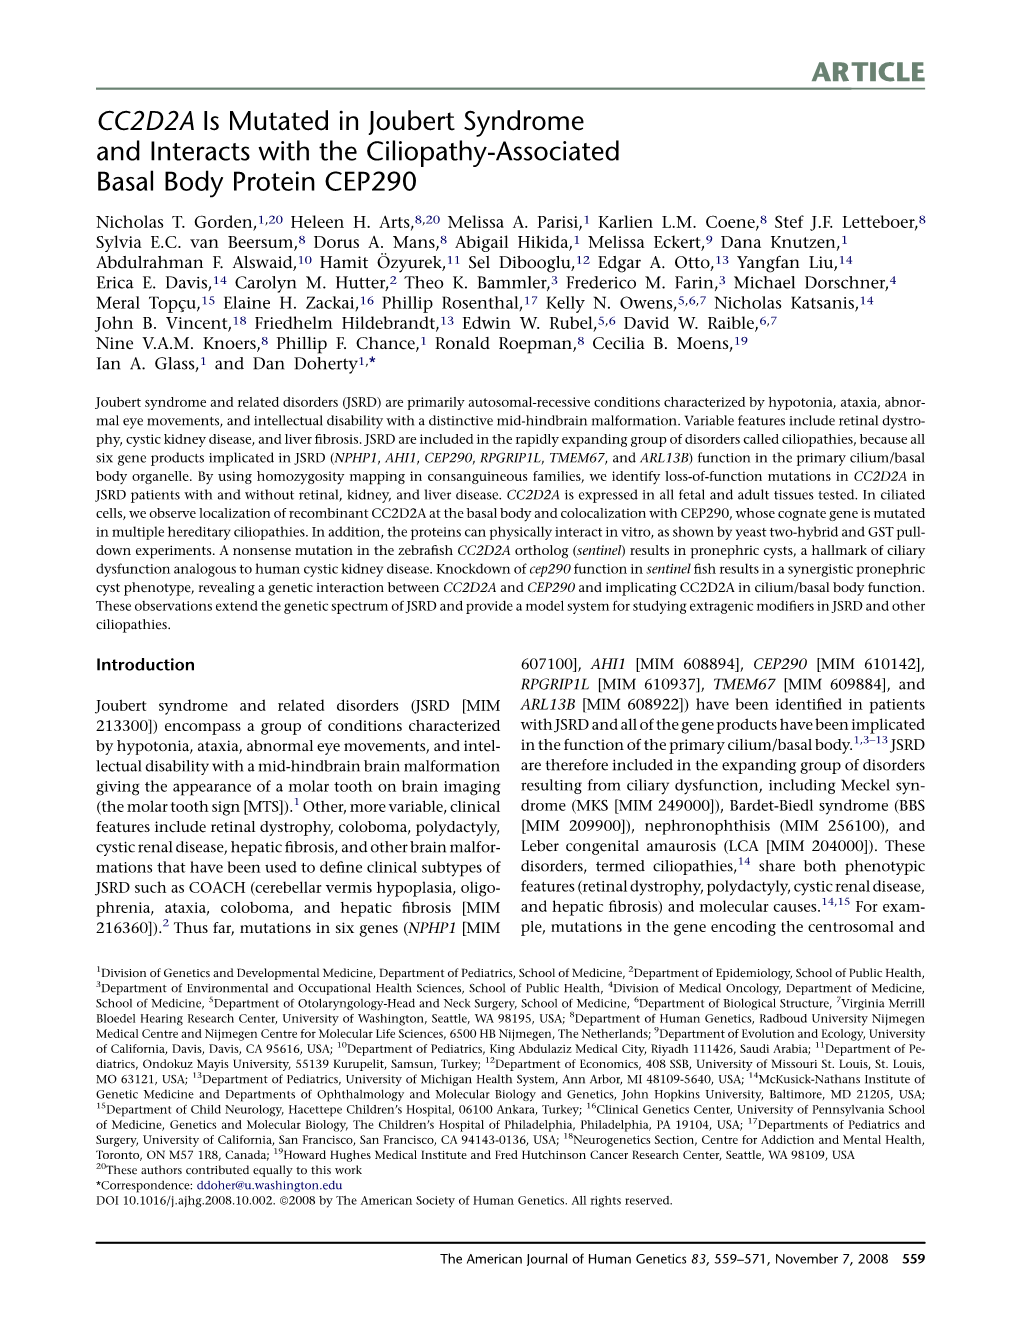 CC2D2A Is Mutated in Joubert Syndrome and Interacts with the Ciliopathy-Associated Basal Body Protein CEP290